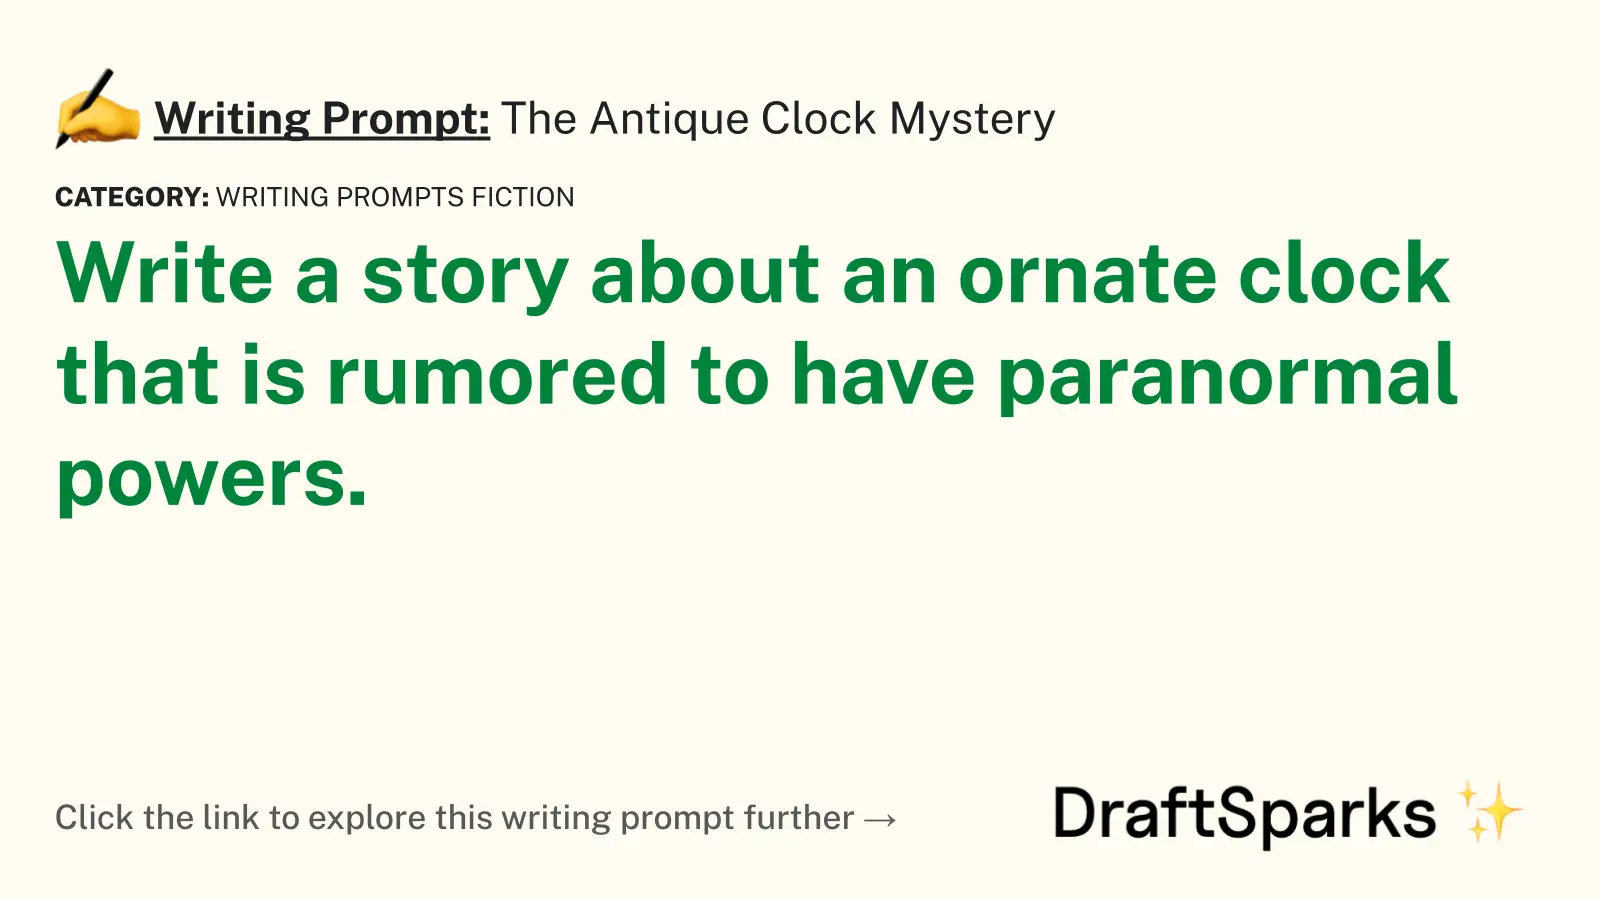 The Antique Clock Mystery